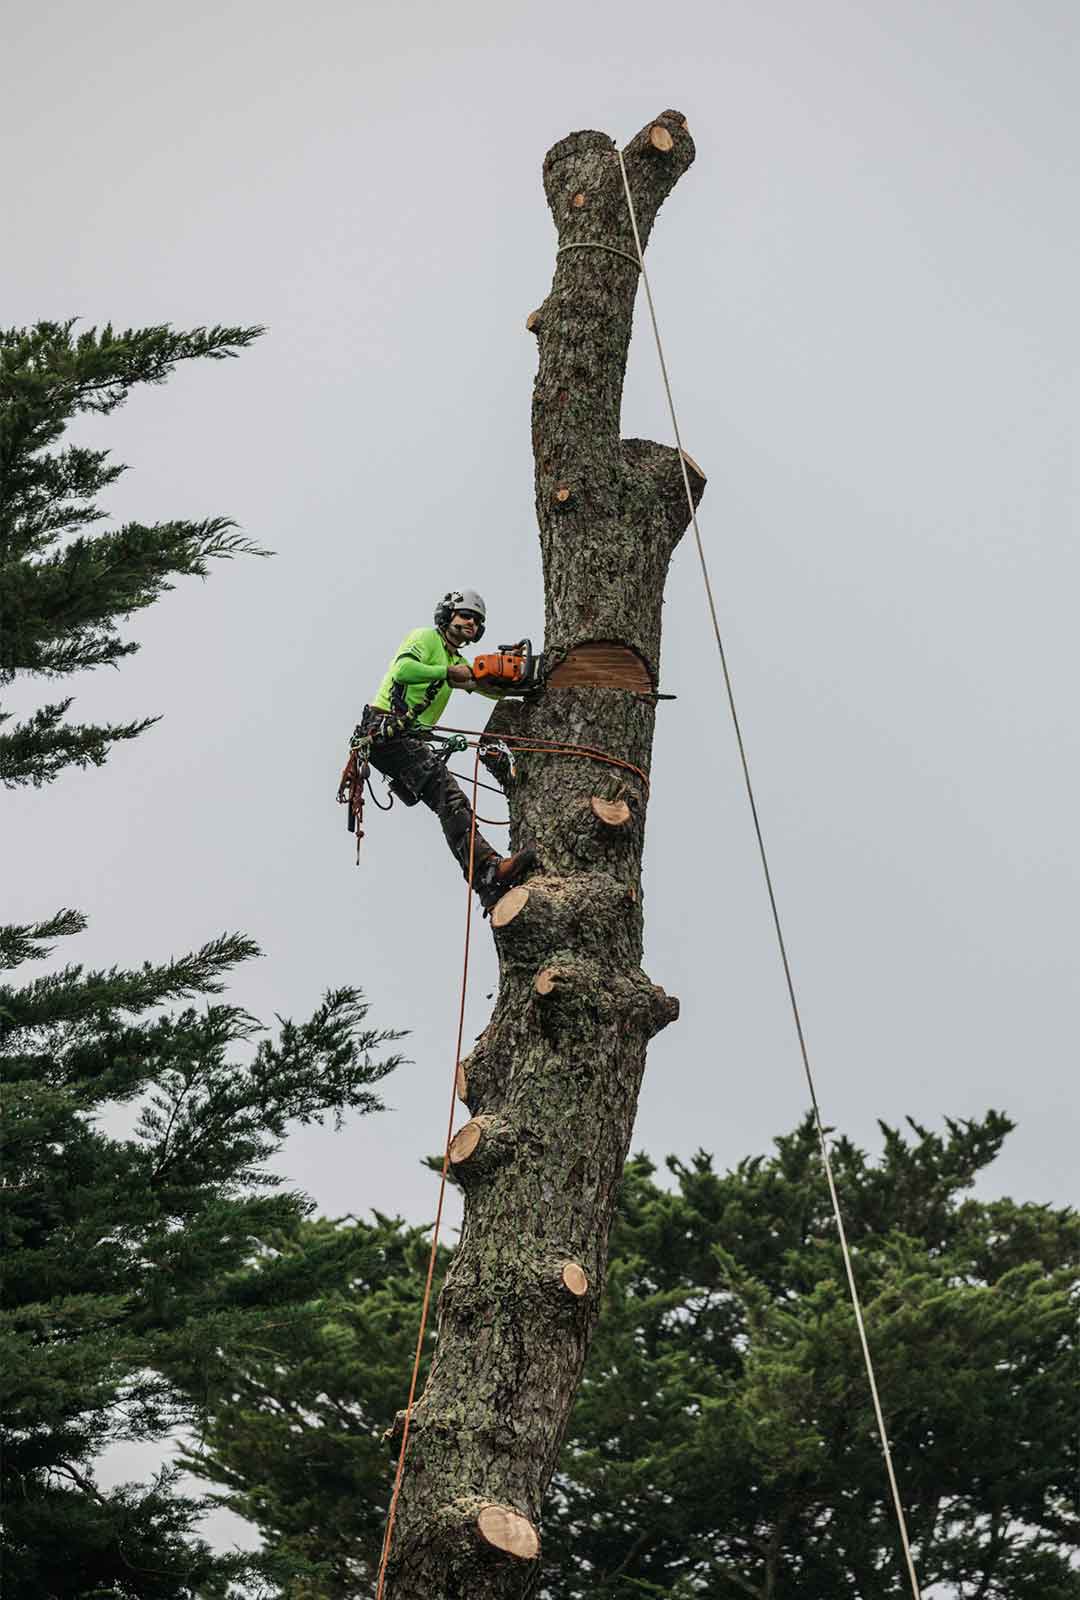 A tree climber completing commercial tree services to clear land for a development.